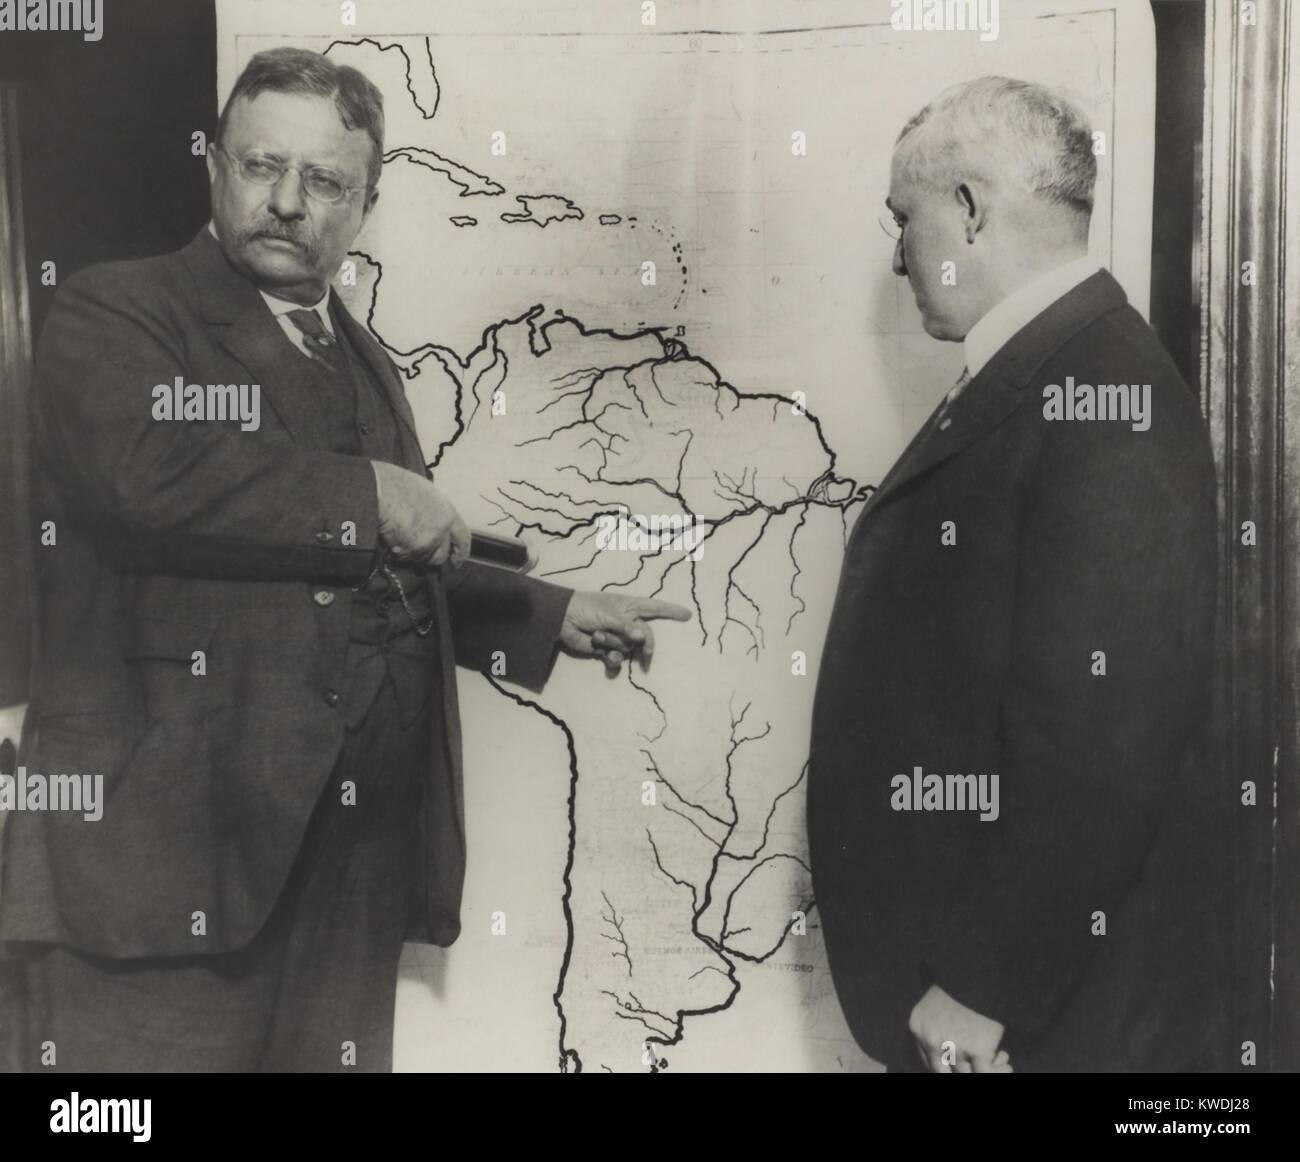 Theodore Roosevelt pointing at the area explored during the Roosevelt-Rondon Scientific Expedition. They explored the 1000-mile long River of Doubt, which was renamed River Roosevelt (BSLOC_2017_8_67) Stock Photo